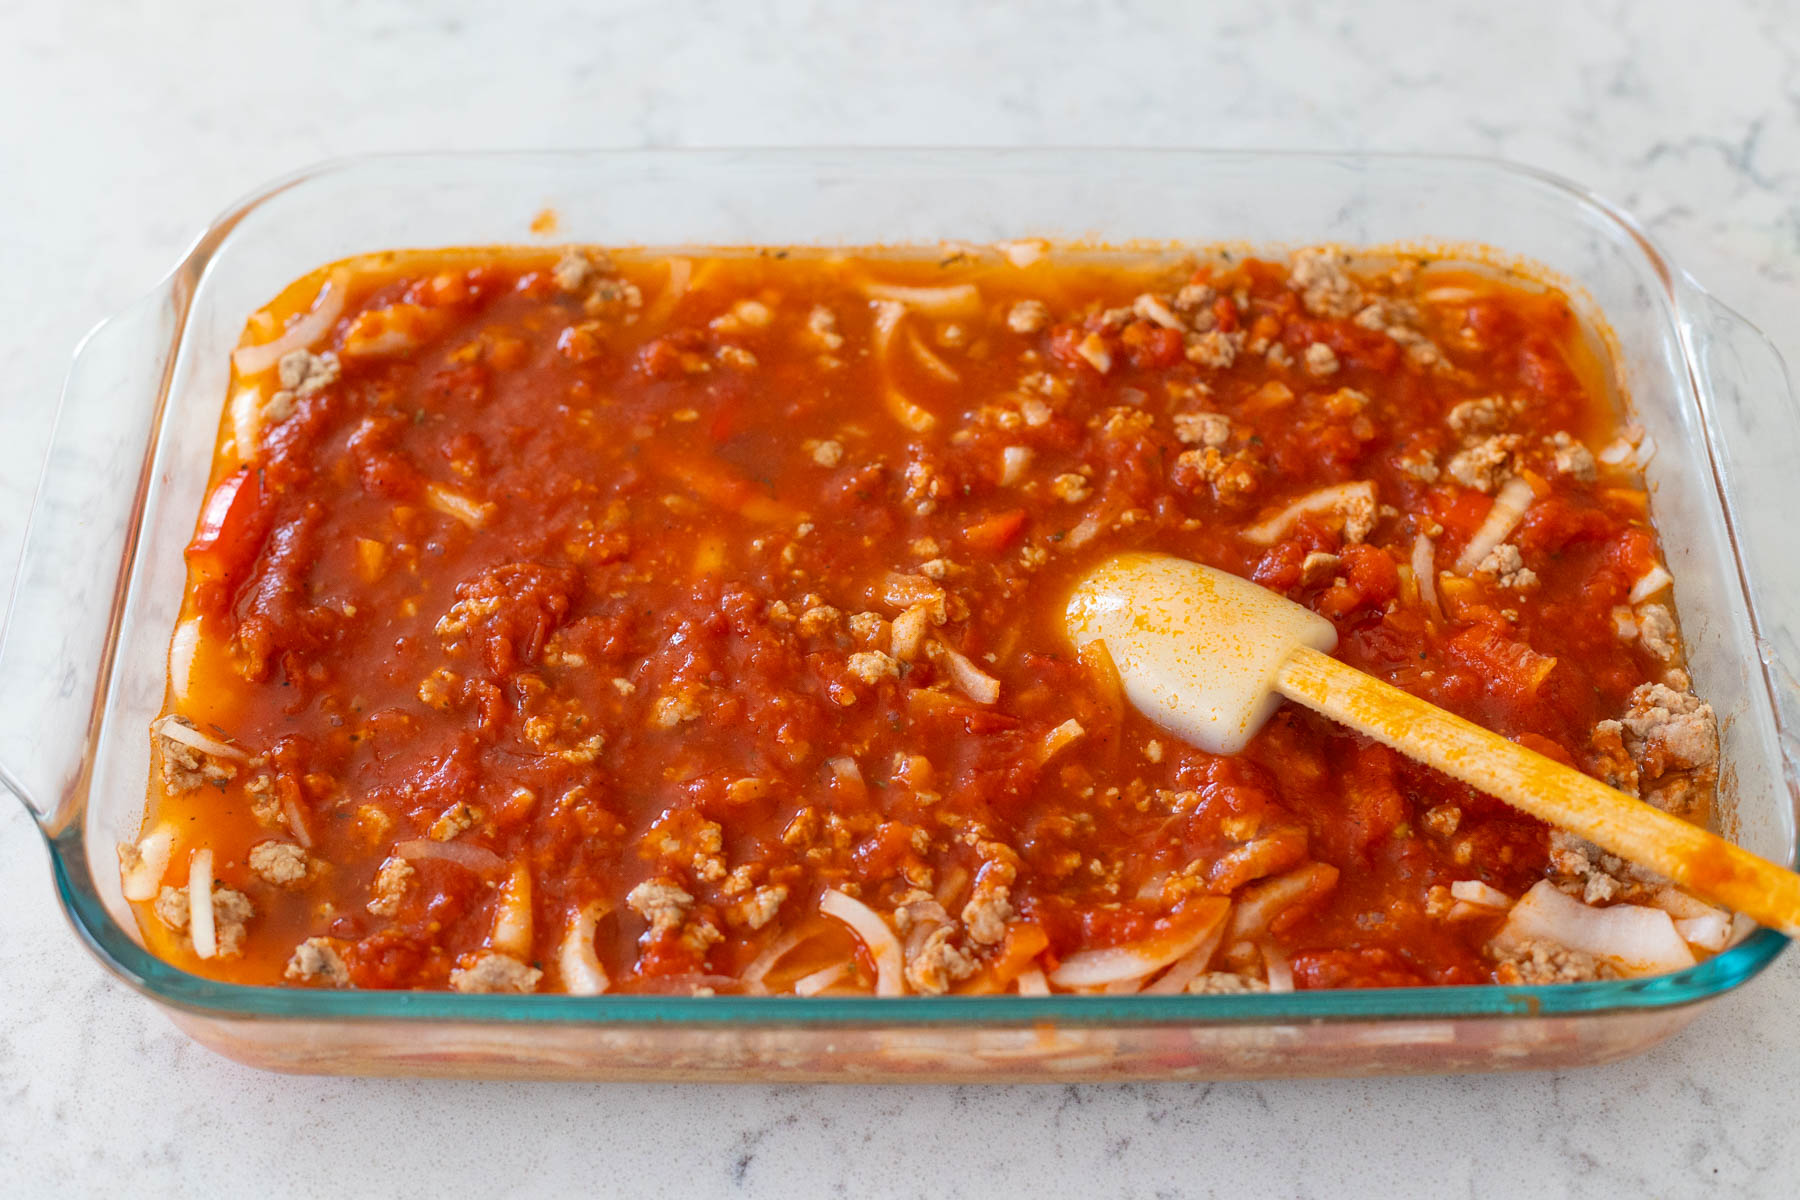 The spatula has just finished gently mixing the water and tomato sauce together in the baking dish.